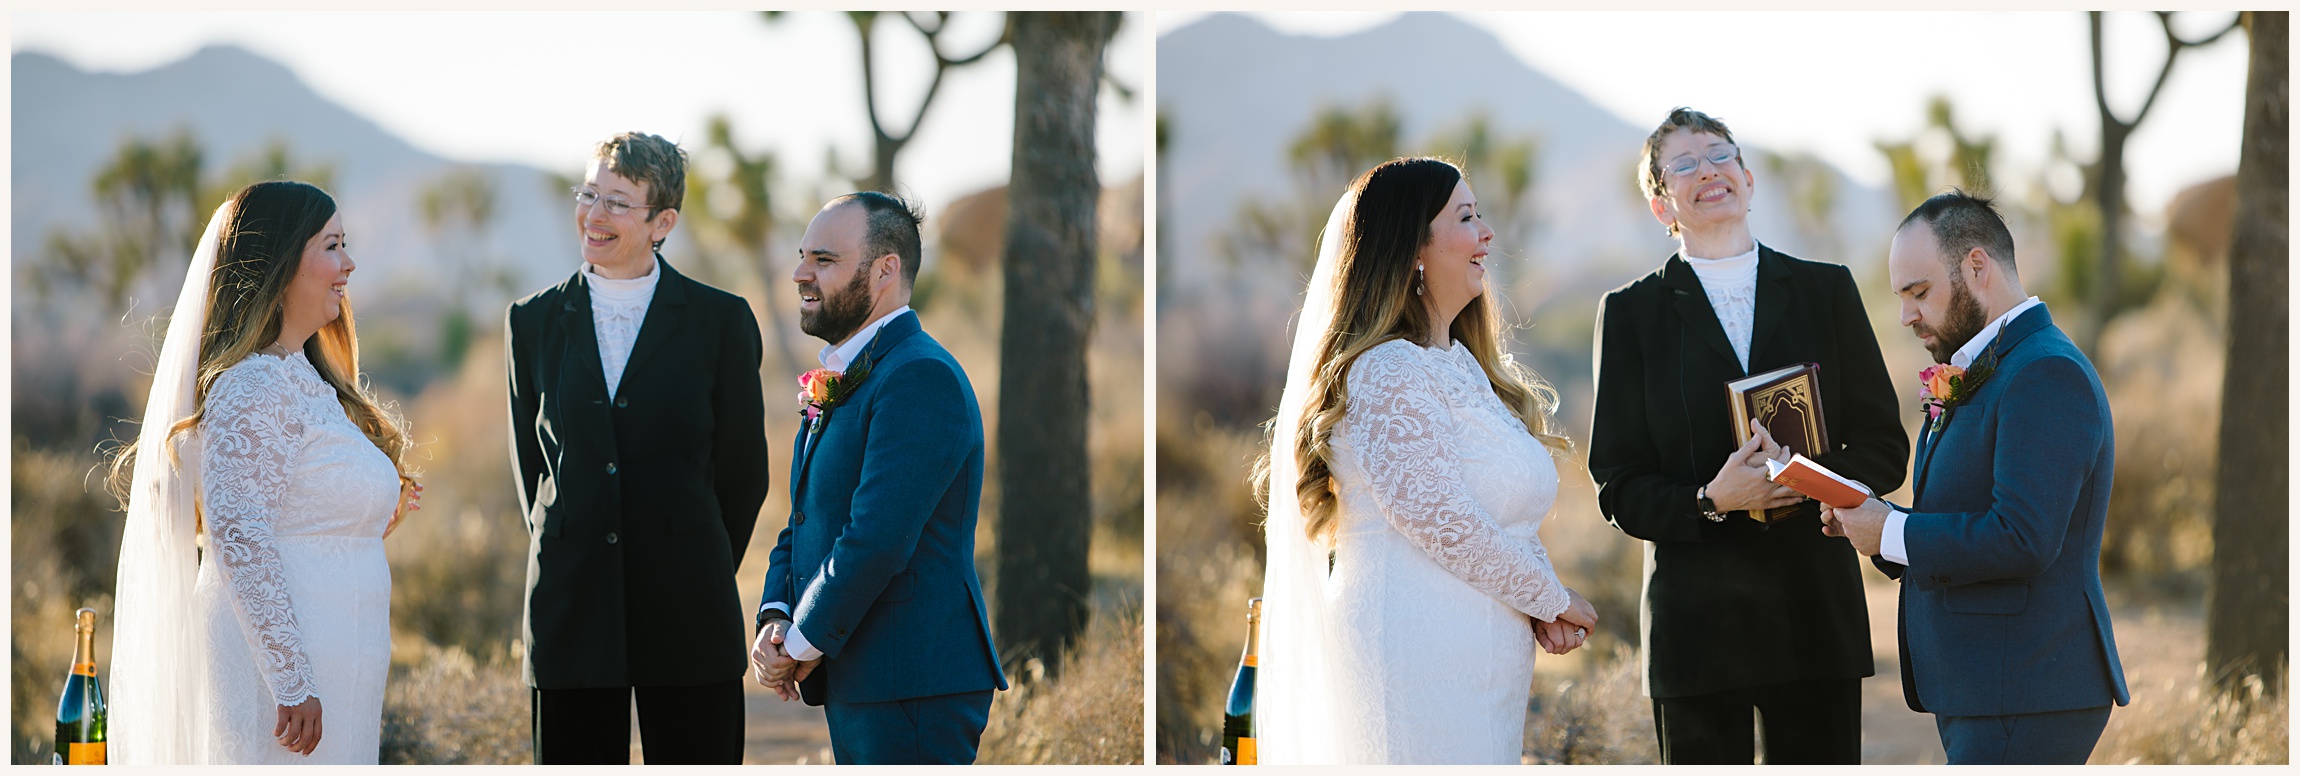 Photo of bride, groom and officiant during elopement cermeony vow exchange in Joshua Tree